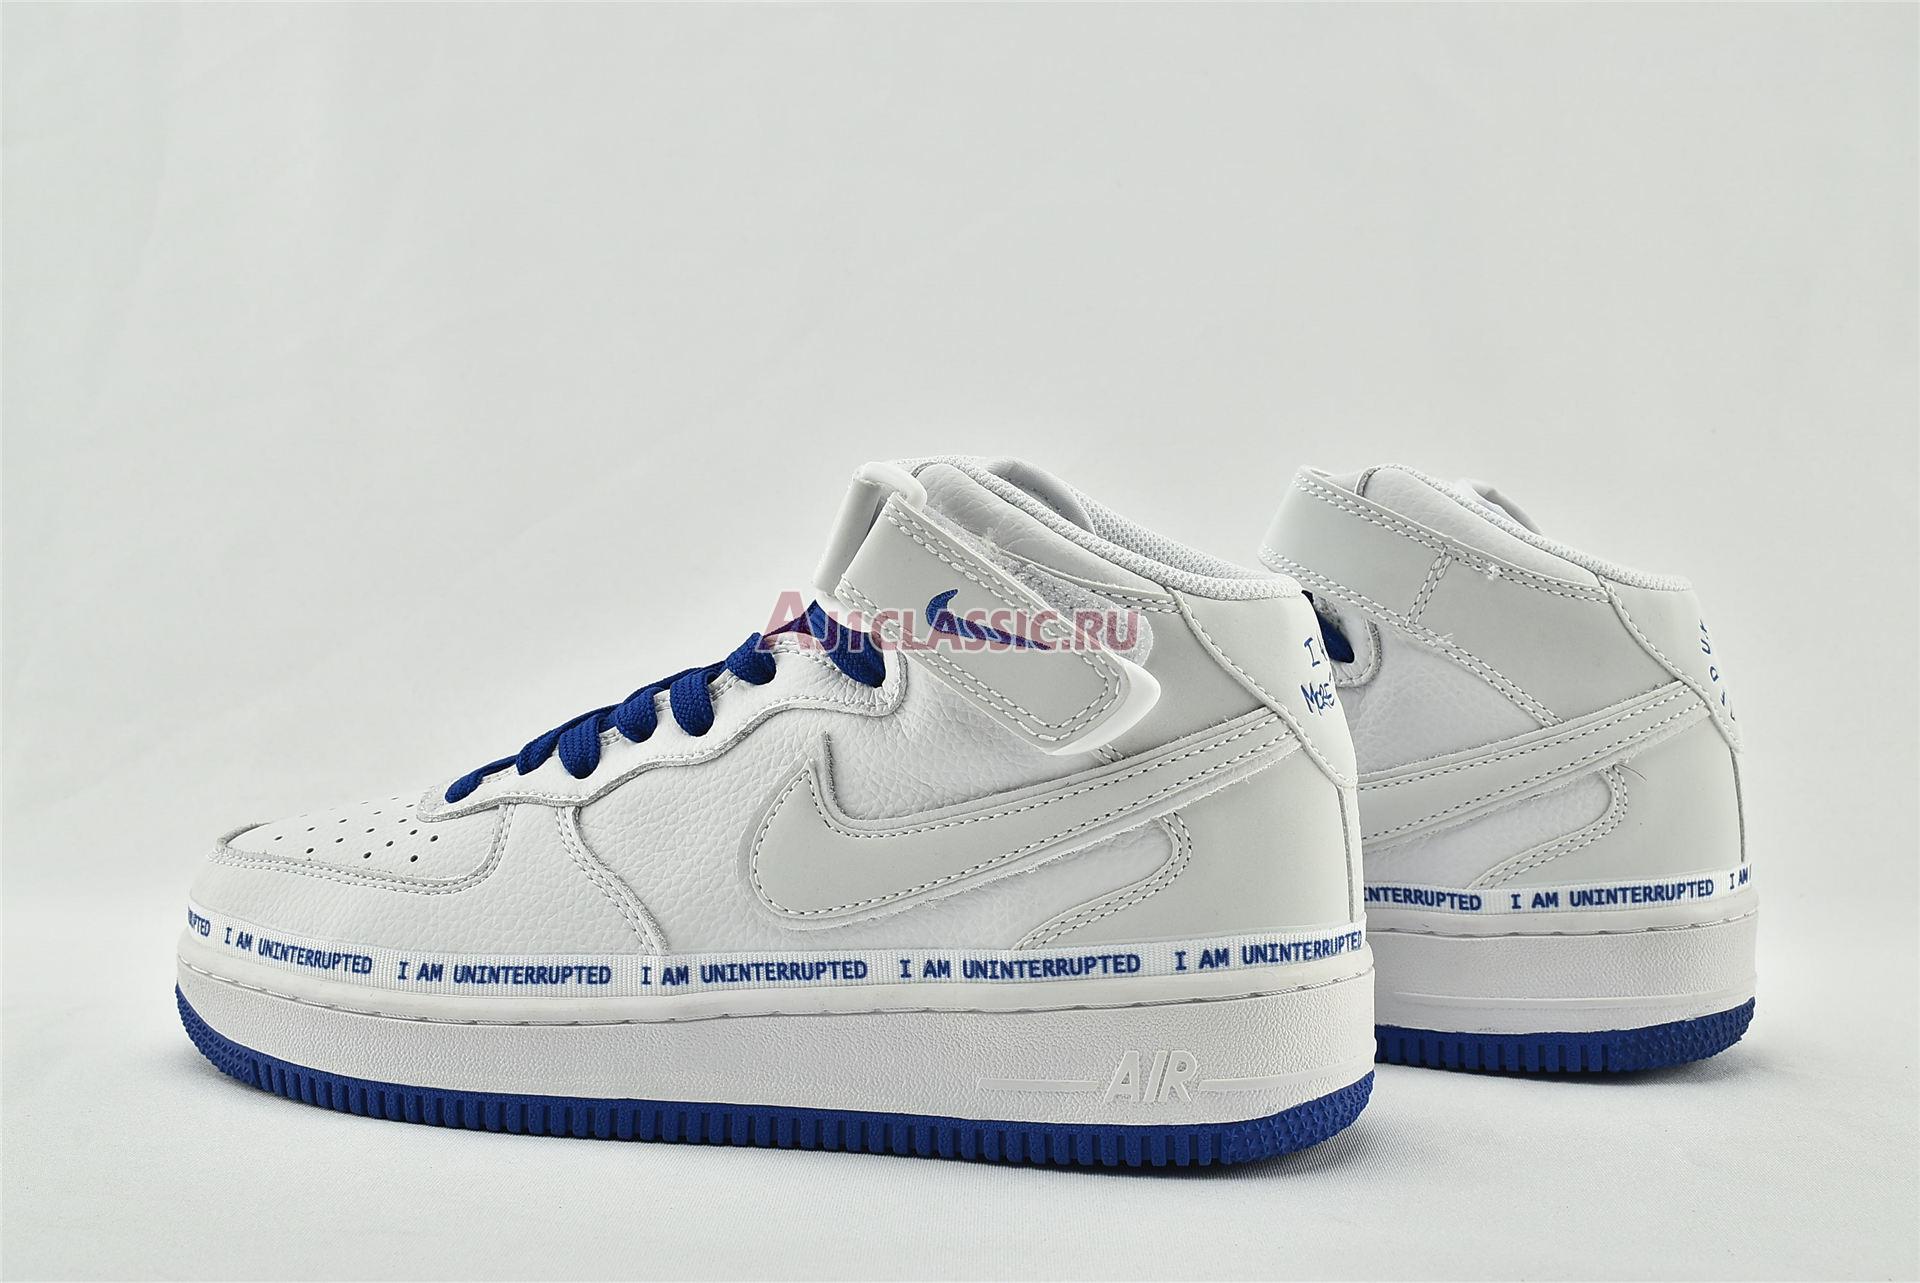 Uninterrupted x Nike Air Force 1 Mid "More Than" CT1206-600